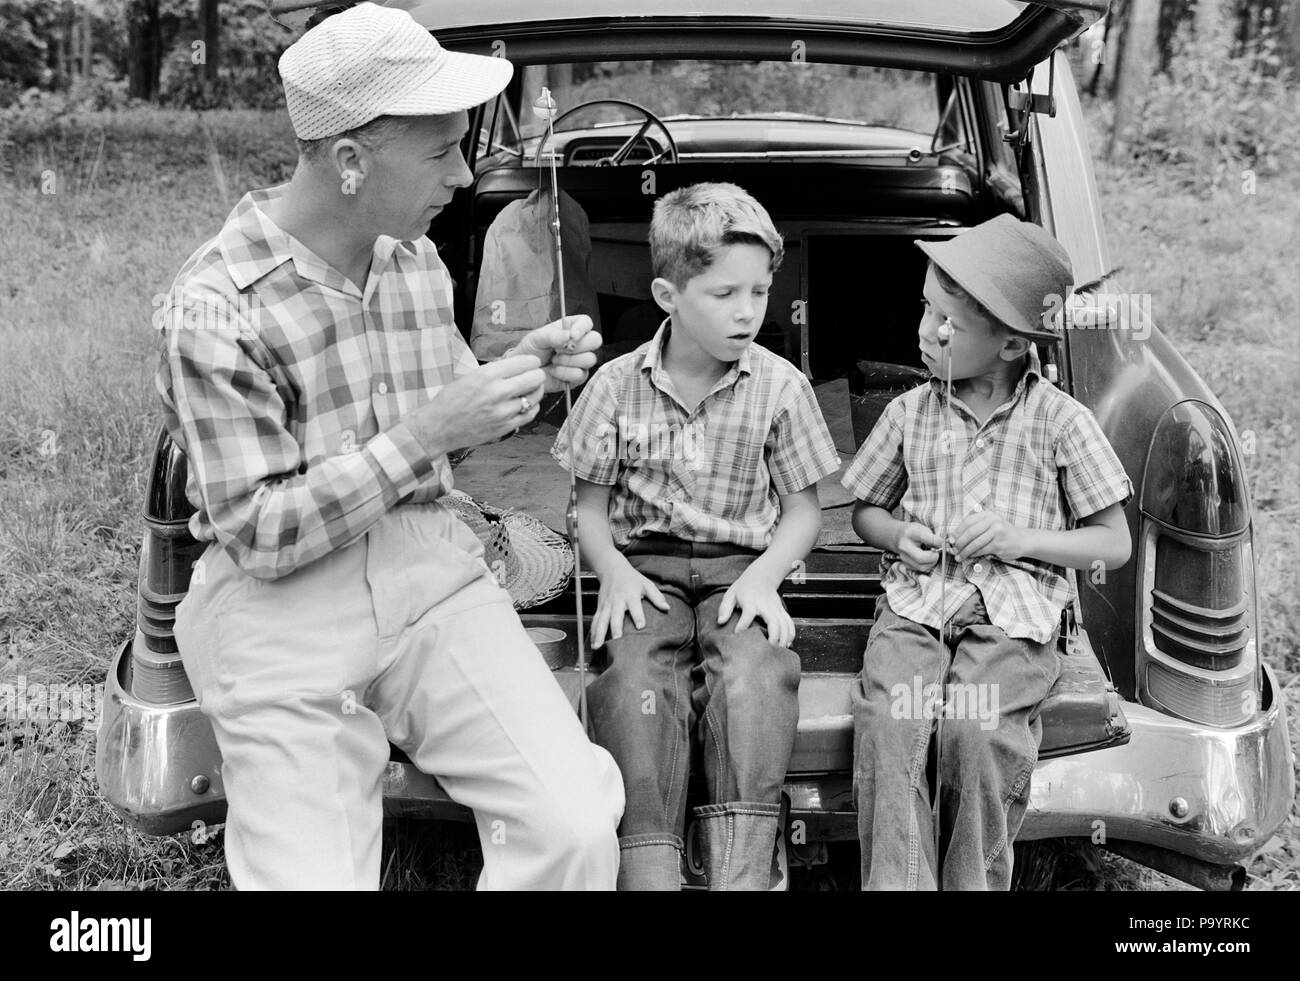 1960s MAN FATHER AND TWO BOYS SONS TWINS SITTING ON REAR BUMPER OF CAR PREPARING FISHING GEAR - a2316 LAN001 HARS TEACHING NOSTALGIA GEAR BROTHER OLD FASHION AUTO 1 JUVENILE VEHICLE TEAMWORK TWIN VACATION SONS IDENTICAL DOUBLE FAMILIES JOY LIFESTYLE PARENTING BROTHERS SHOWING RURAL HEALTHINESS PREPARING HALF-LENGTH PERSONS INSPIRATION MATCH AUTOMOBILE CARING MALES SIBLINGS TRANSPORTATION FATHERS B&W FREEDOM MATCHING SAME TIME OFF HAPPINESS ADVENTURE AND AUTOS GETAWAY DADS KNOWLEDGE BUMPER ON AUTHORITY HOLIDAYS SIBLING INSTRUCTING CONNECTION AUTOMOBILES ESCAPE VEHICLES LOOK-ALIKE DUPLICATE Stock Photo